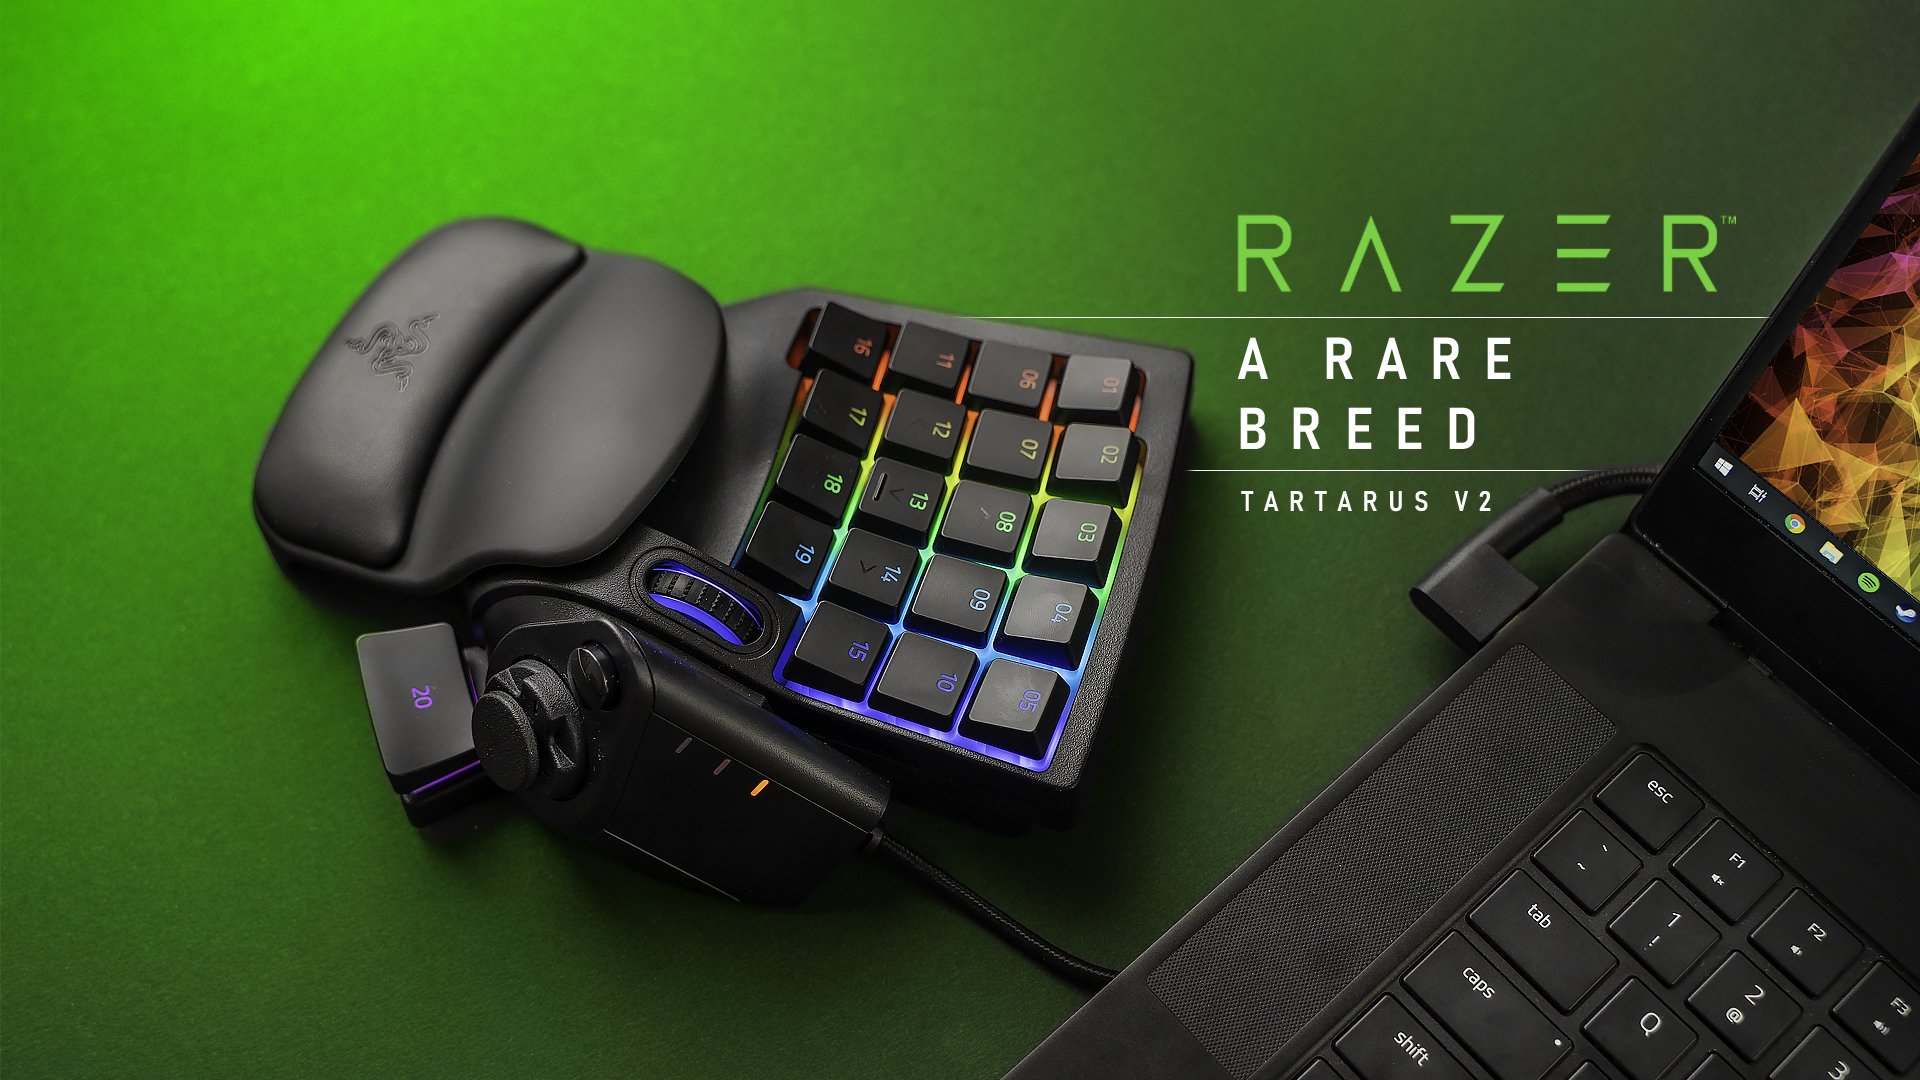 sekundær nåde Geografi Hardware Canucks on Twitter: "Gaming keypads might need to make a comeback!  ⌨️ Let's find out why by taking a look at the @Razer Tartarus v2. 🐍🐍  https://t.co/xW9eTYE3yJ https://t.co/UUSQyPtZI2" / Twitter